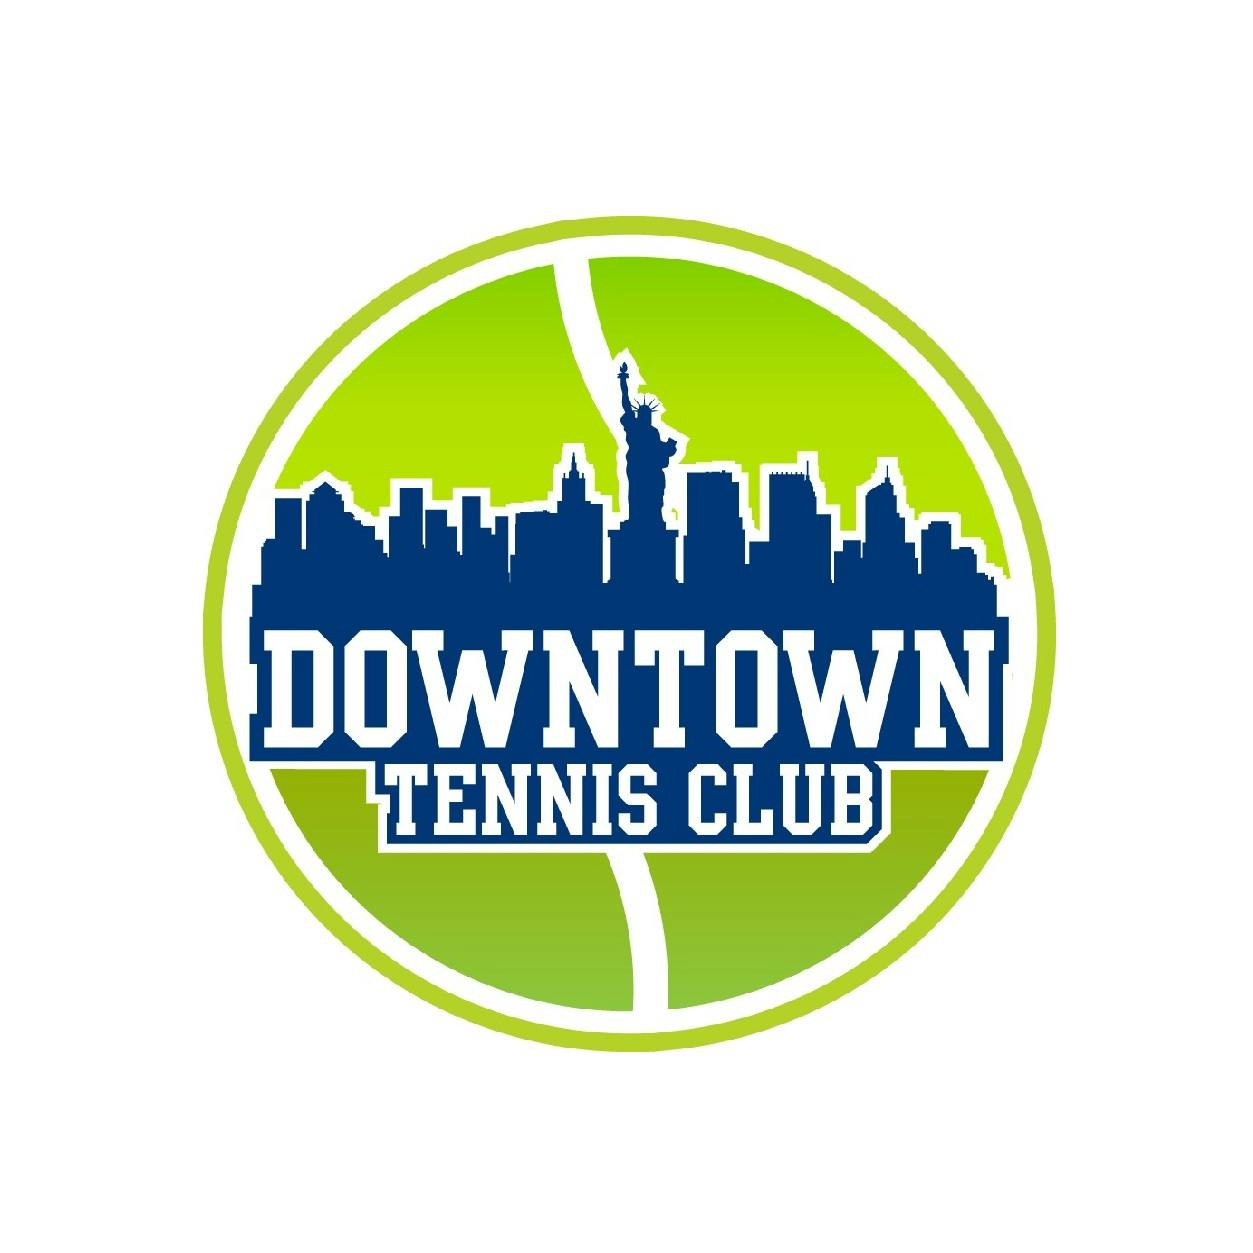 Image 1 of 7 of Downtown Tennis Club court